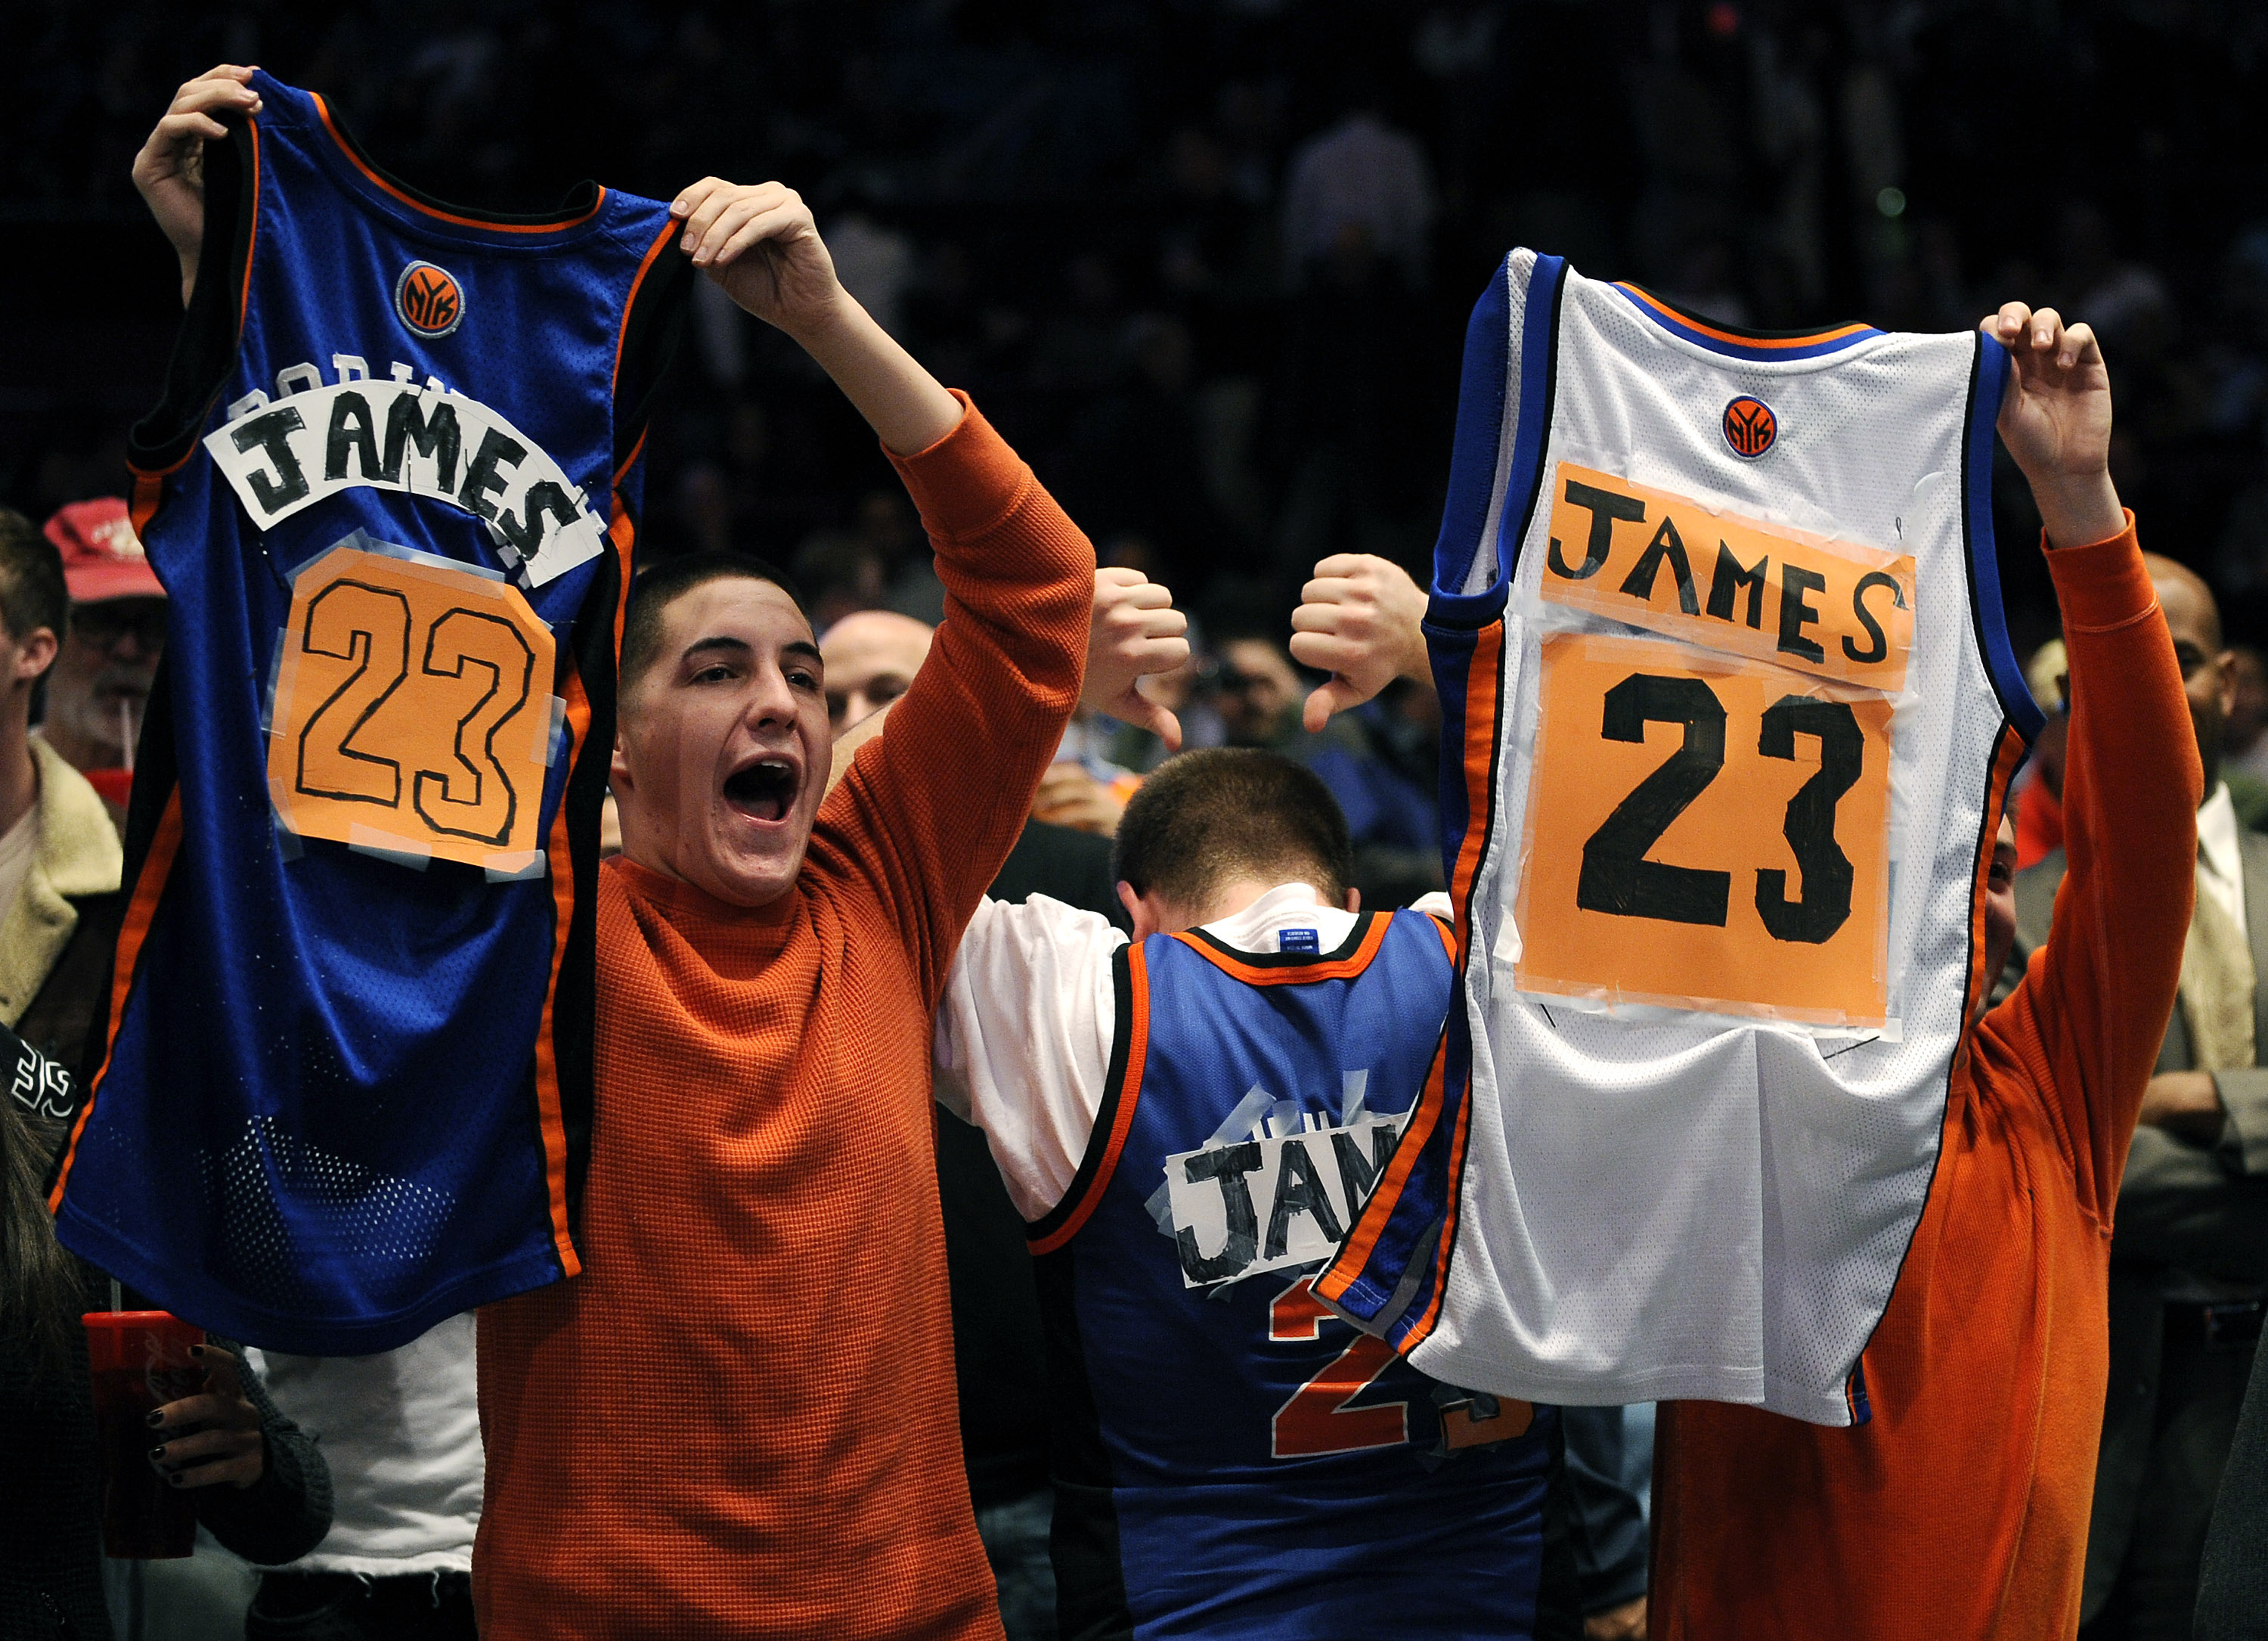 New York Knicks fans cheer Cleveland Cavaliers LeBron James in the first half at Madison Square Garden in New York, November 25, 2008. (Photo by Jeff Zelevansky /Icon SMI/Icon Sport Media via Getty Images)